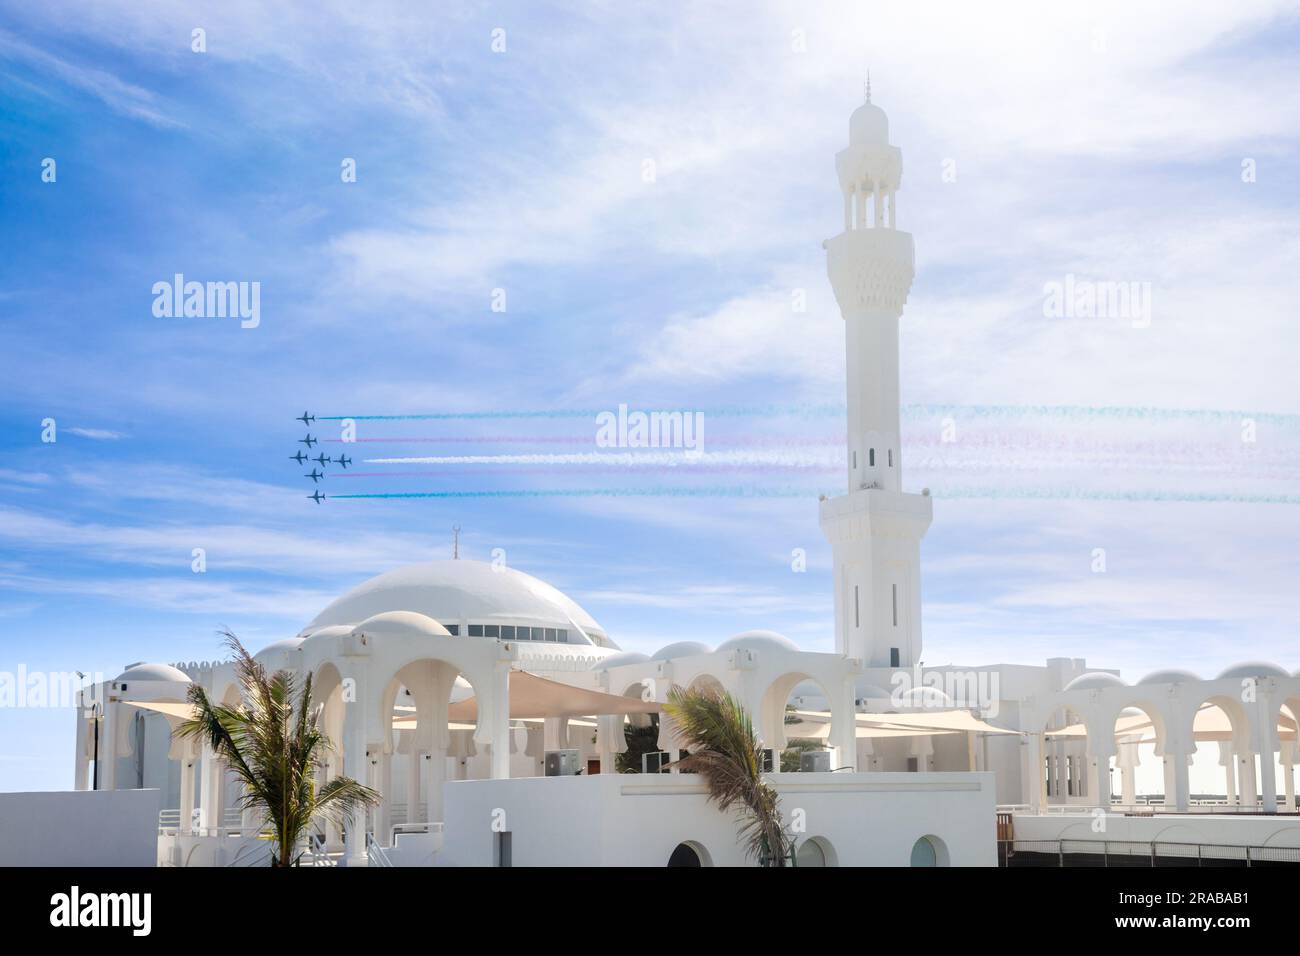 Fighter Jets Squadron with smoke traces over Alrahmah mosque, Jeddah, Saudi Arabia Stock Photo